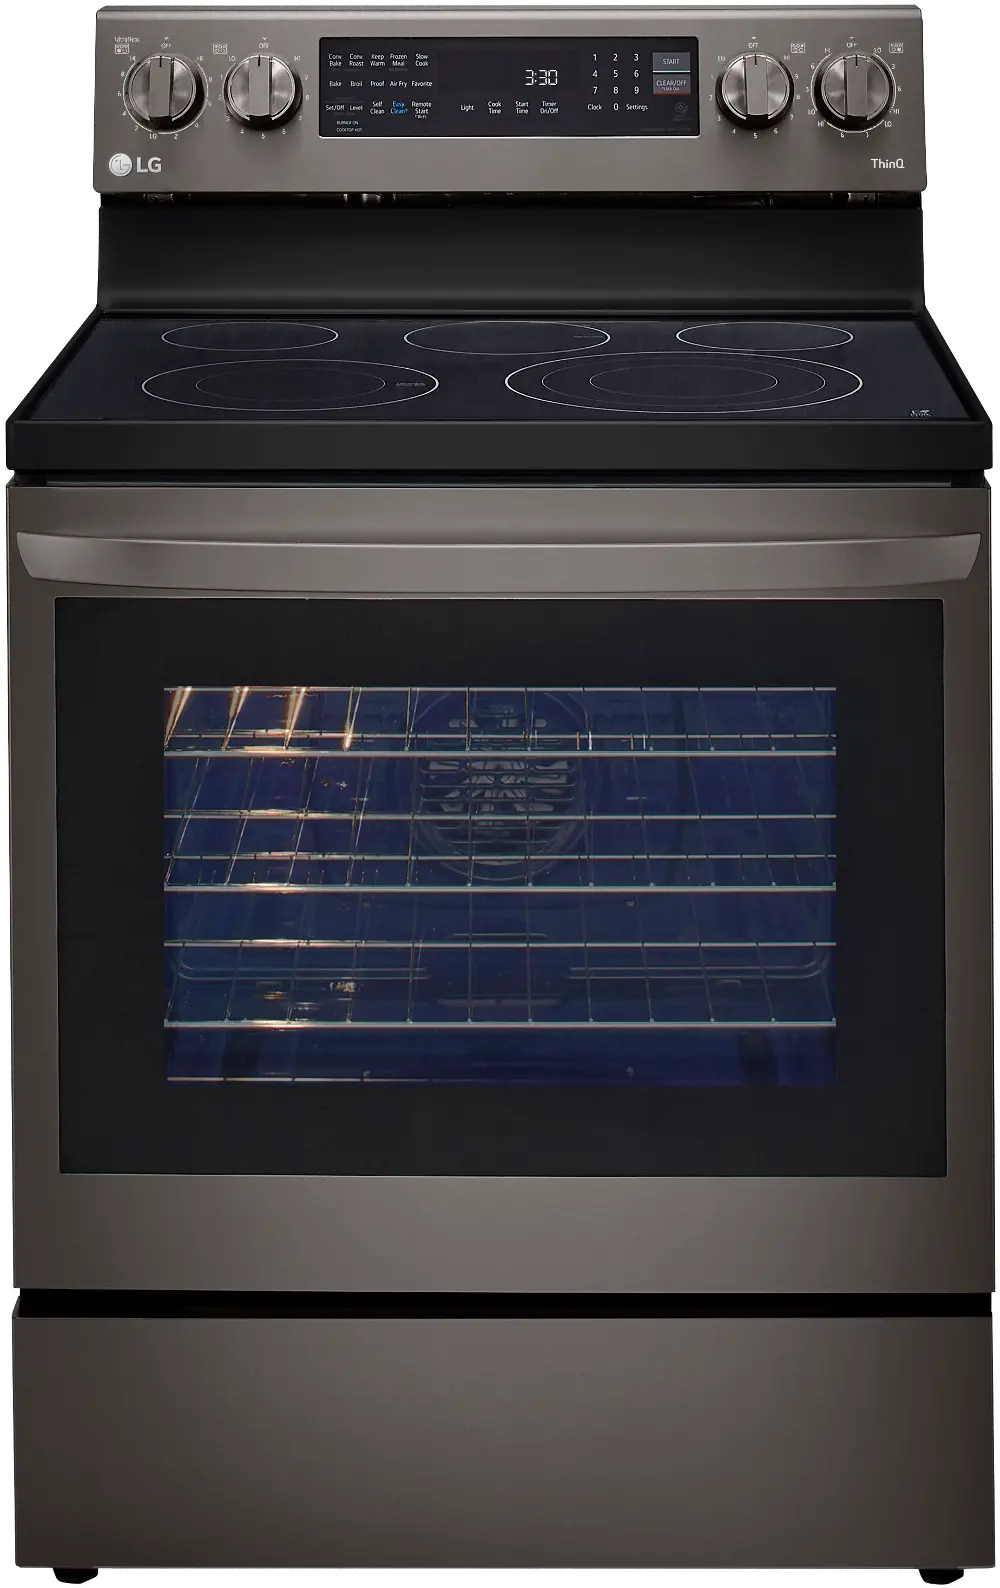 LREL6325D LG 6.3 cu ft Electric Range with InstaView - Black Stainless Steel-1